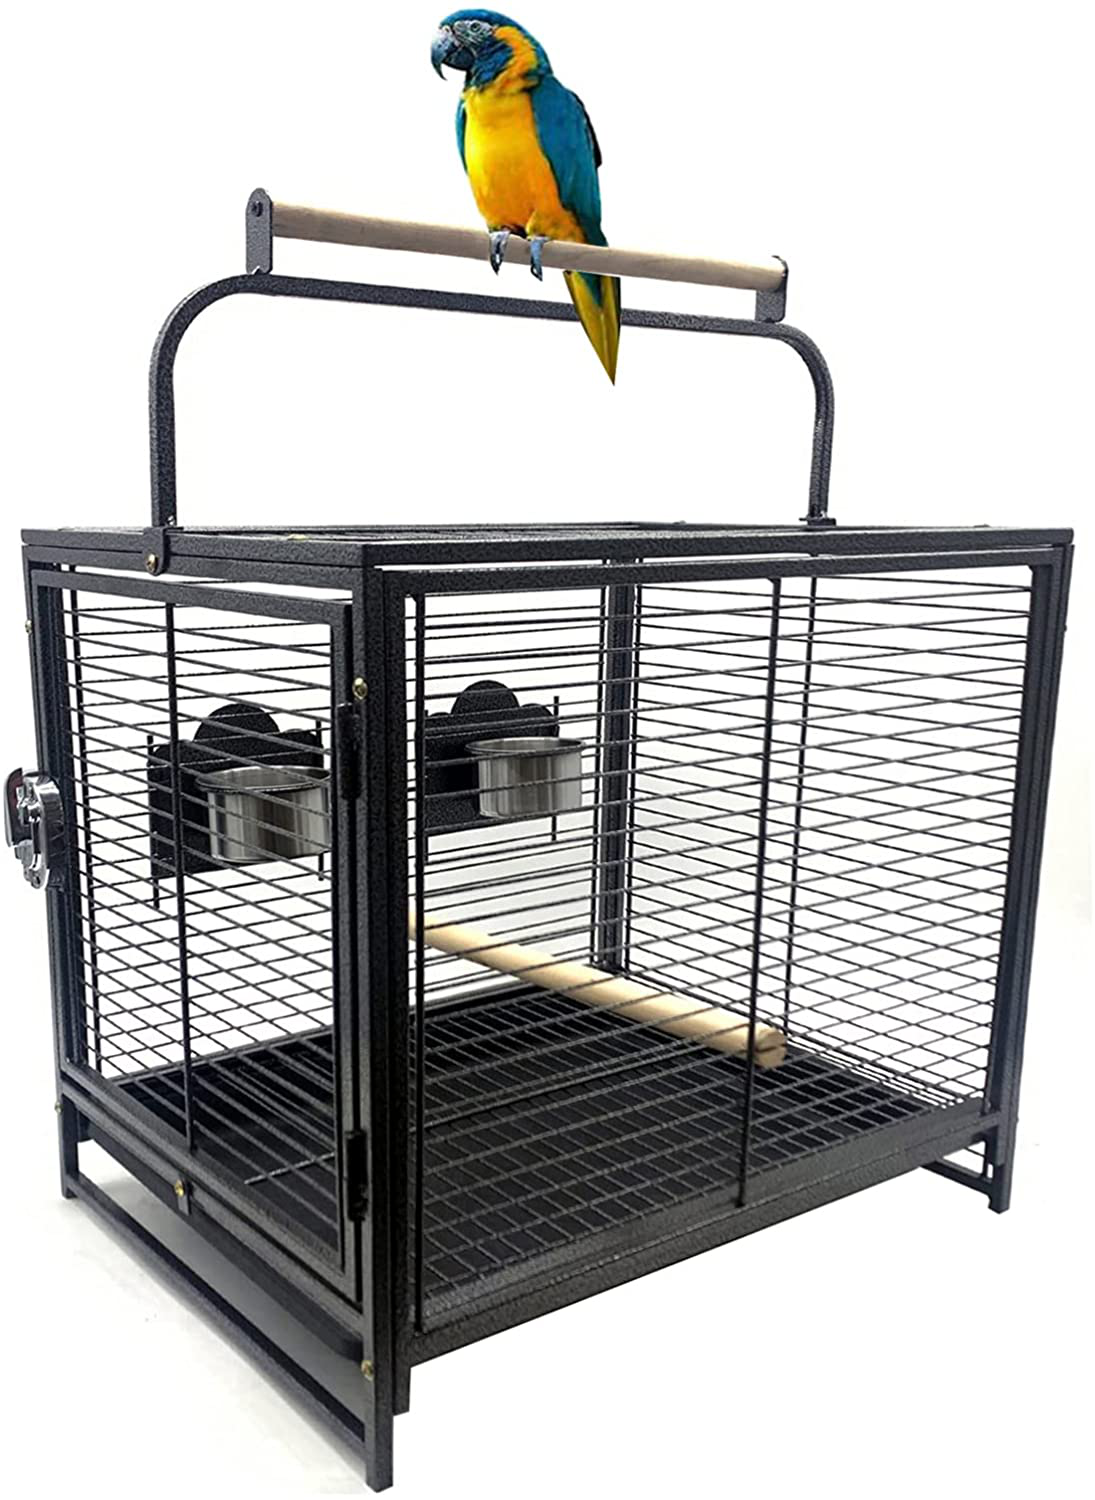 Mcage Portable Durable Heavy Duty Travel Veterinary Bird Parrot Carrier Cage Feeding Bowl Play Stand Perch with Handle Animals & Pet Supplies > Pet Supplies > Bird Supplies > Bird Cages & Stands Mcage Black Vein 19" x 15" x 25"H 